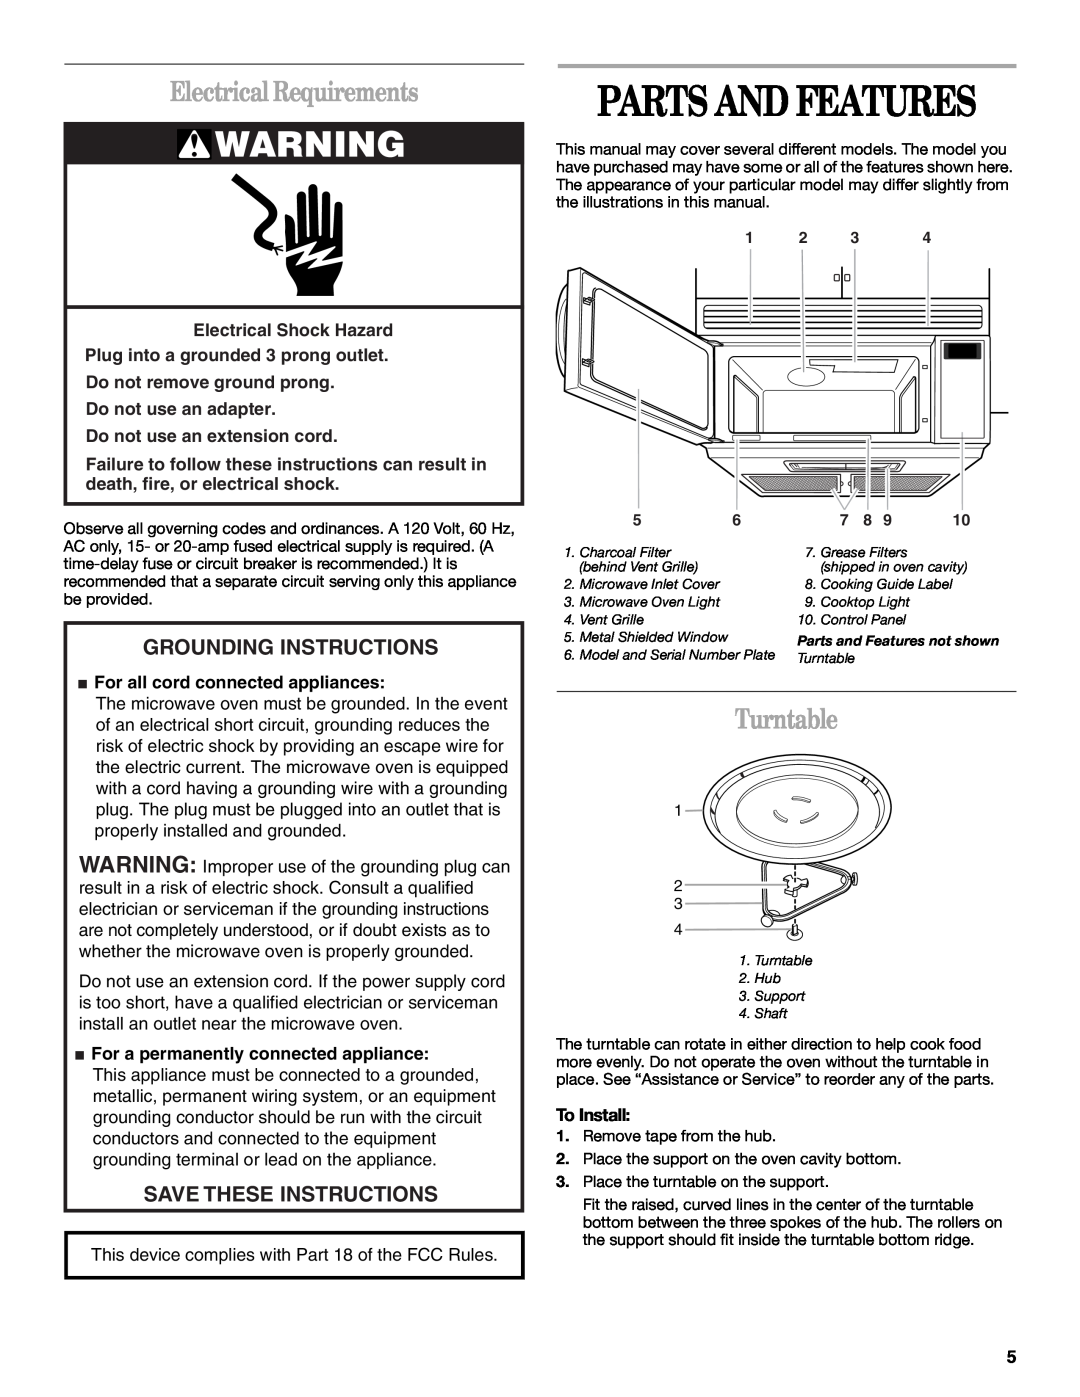 Whirlpool MH1141XM Parts And Features, Electrical Requirements, Turntable, Grounding Instructions, Save These Instructions 